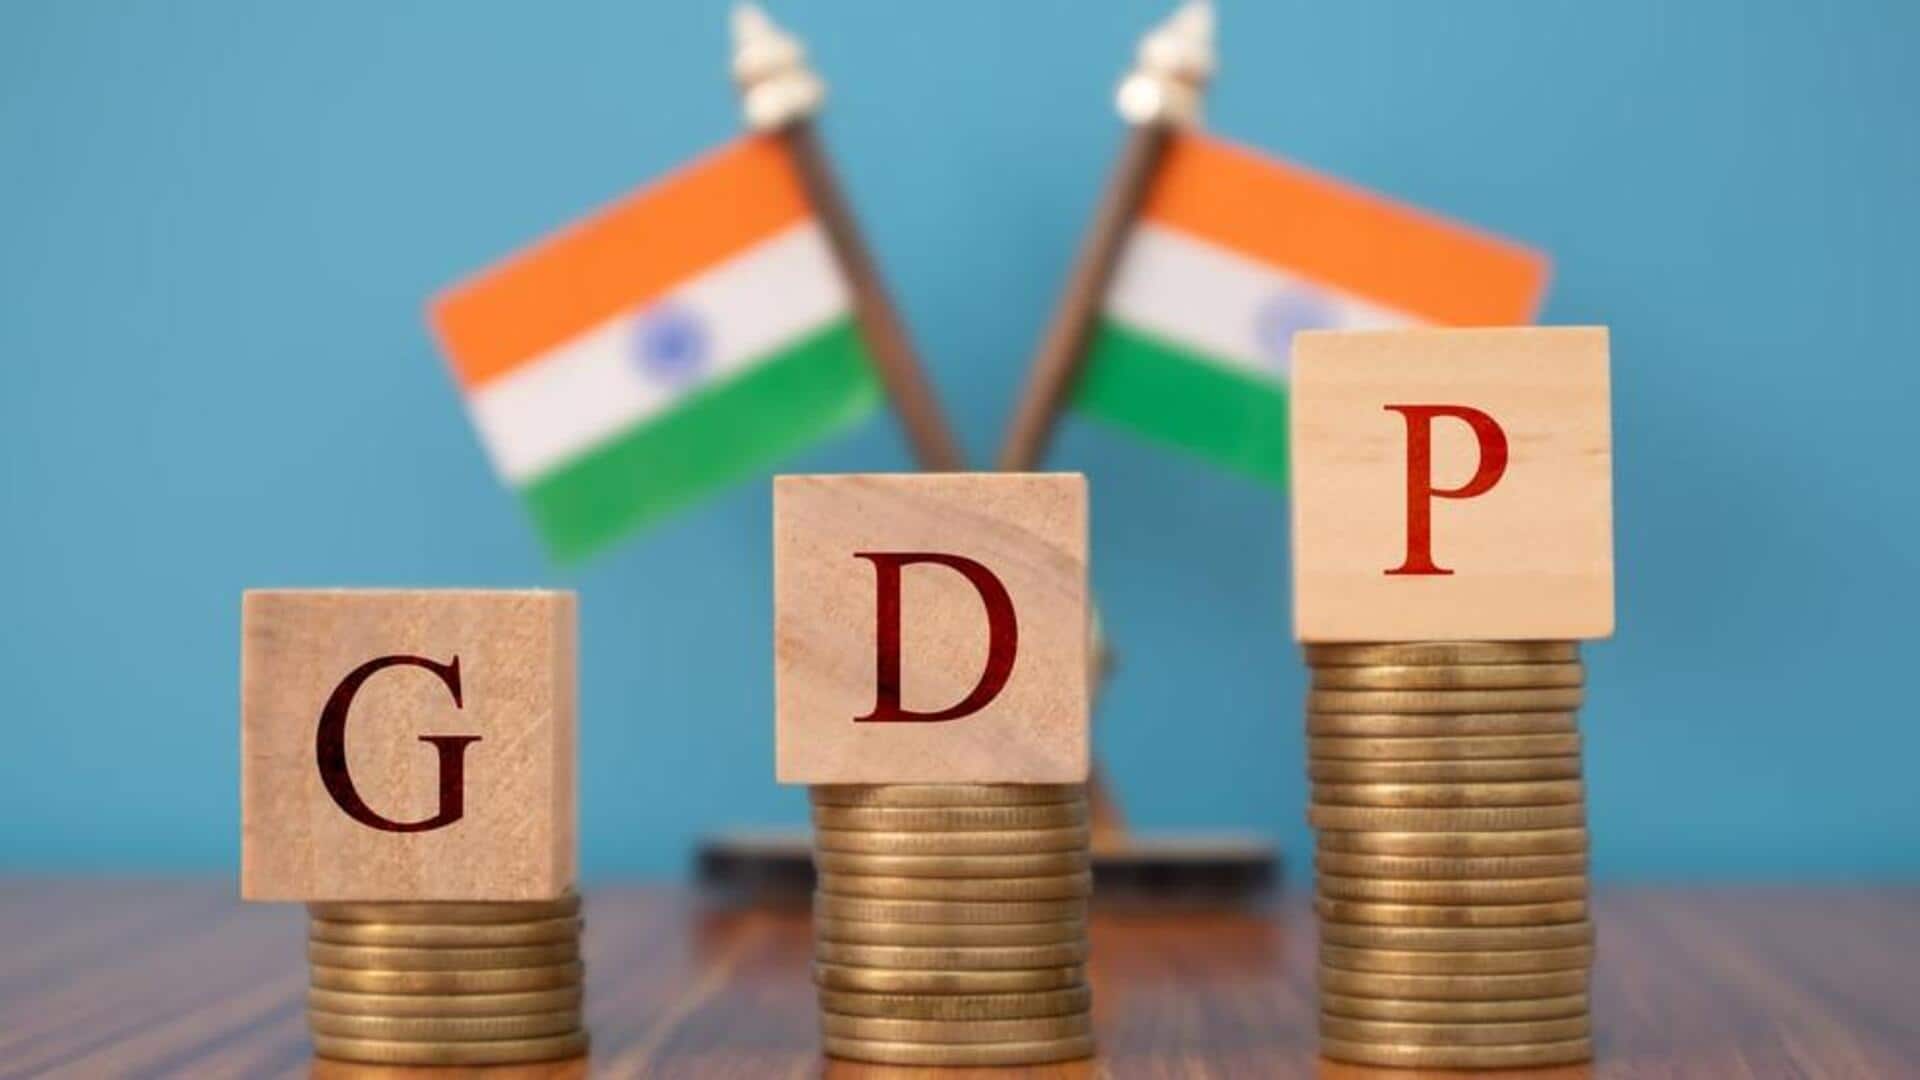 GDP growth could dip amid uncertainties surrounding upcoming elections